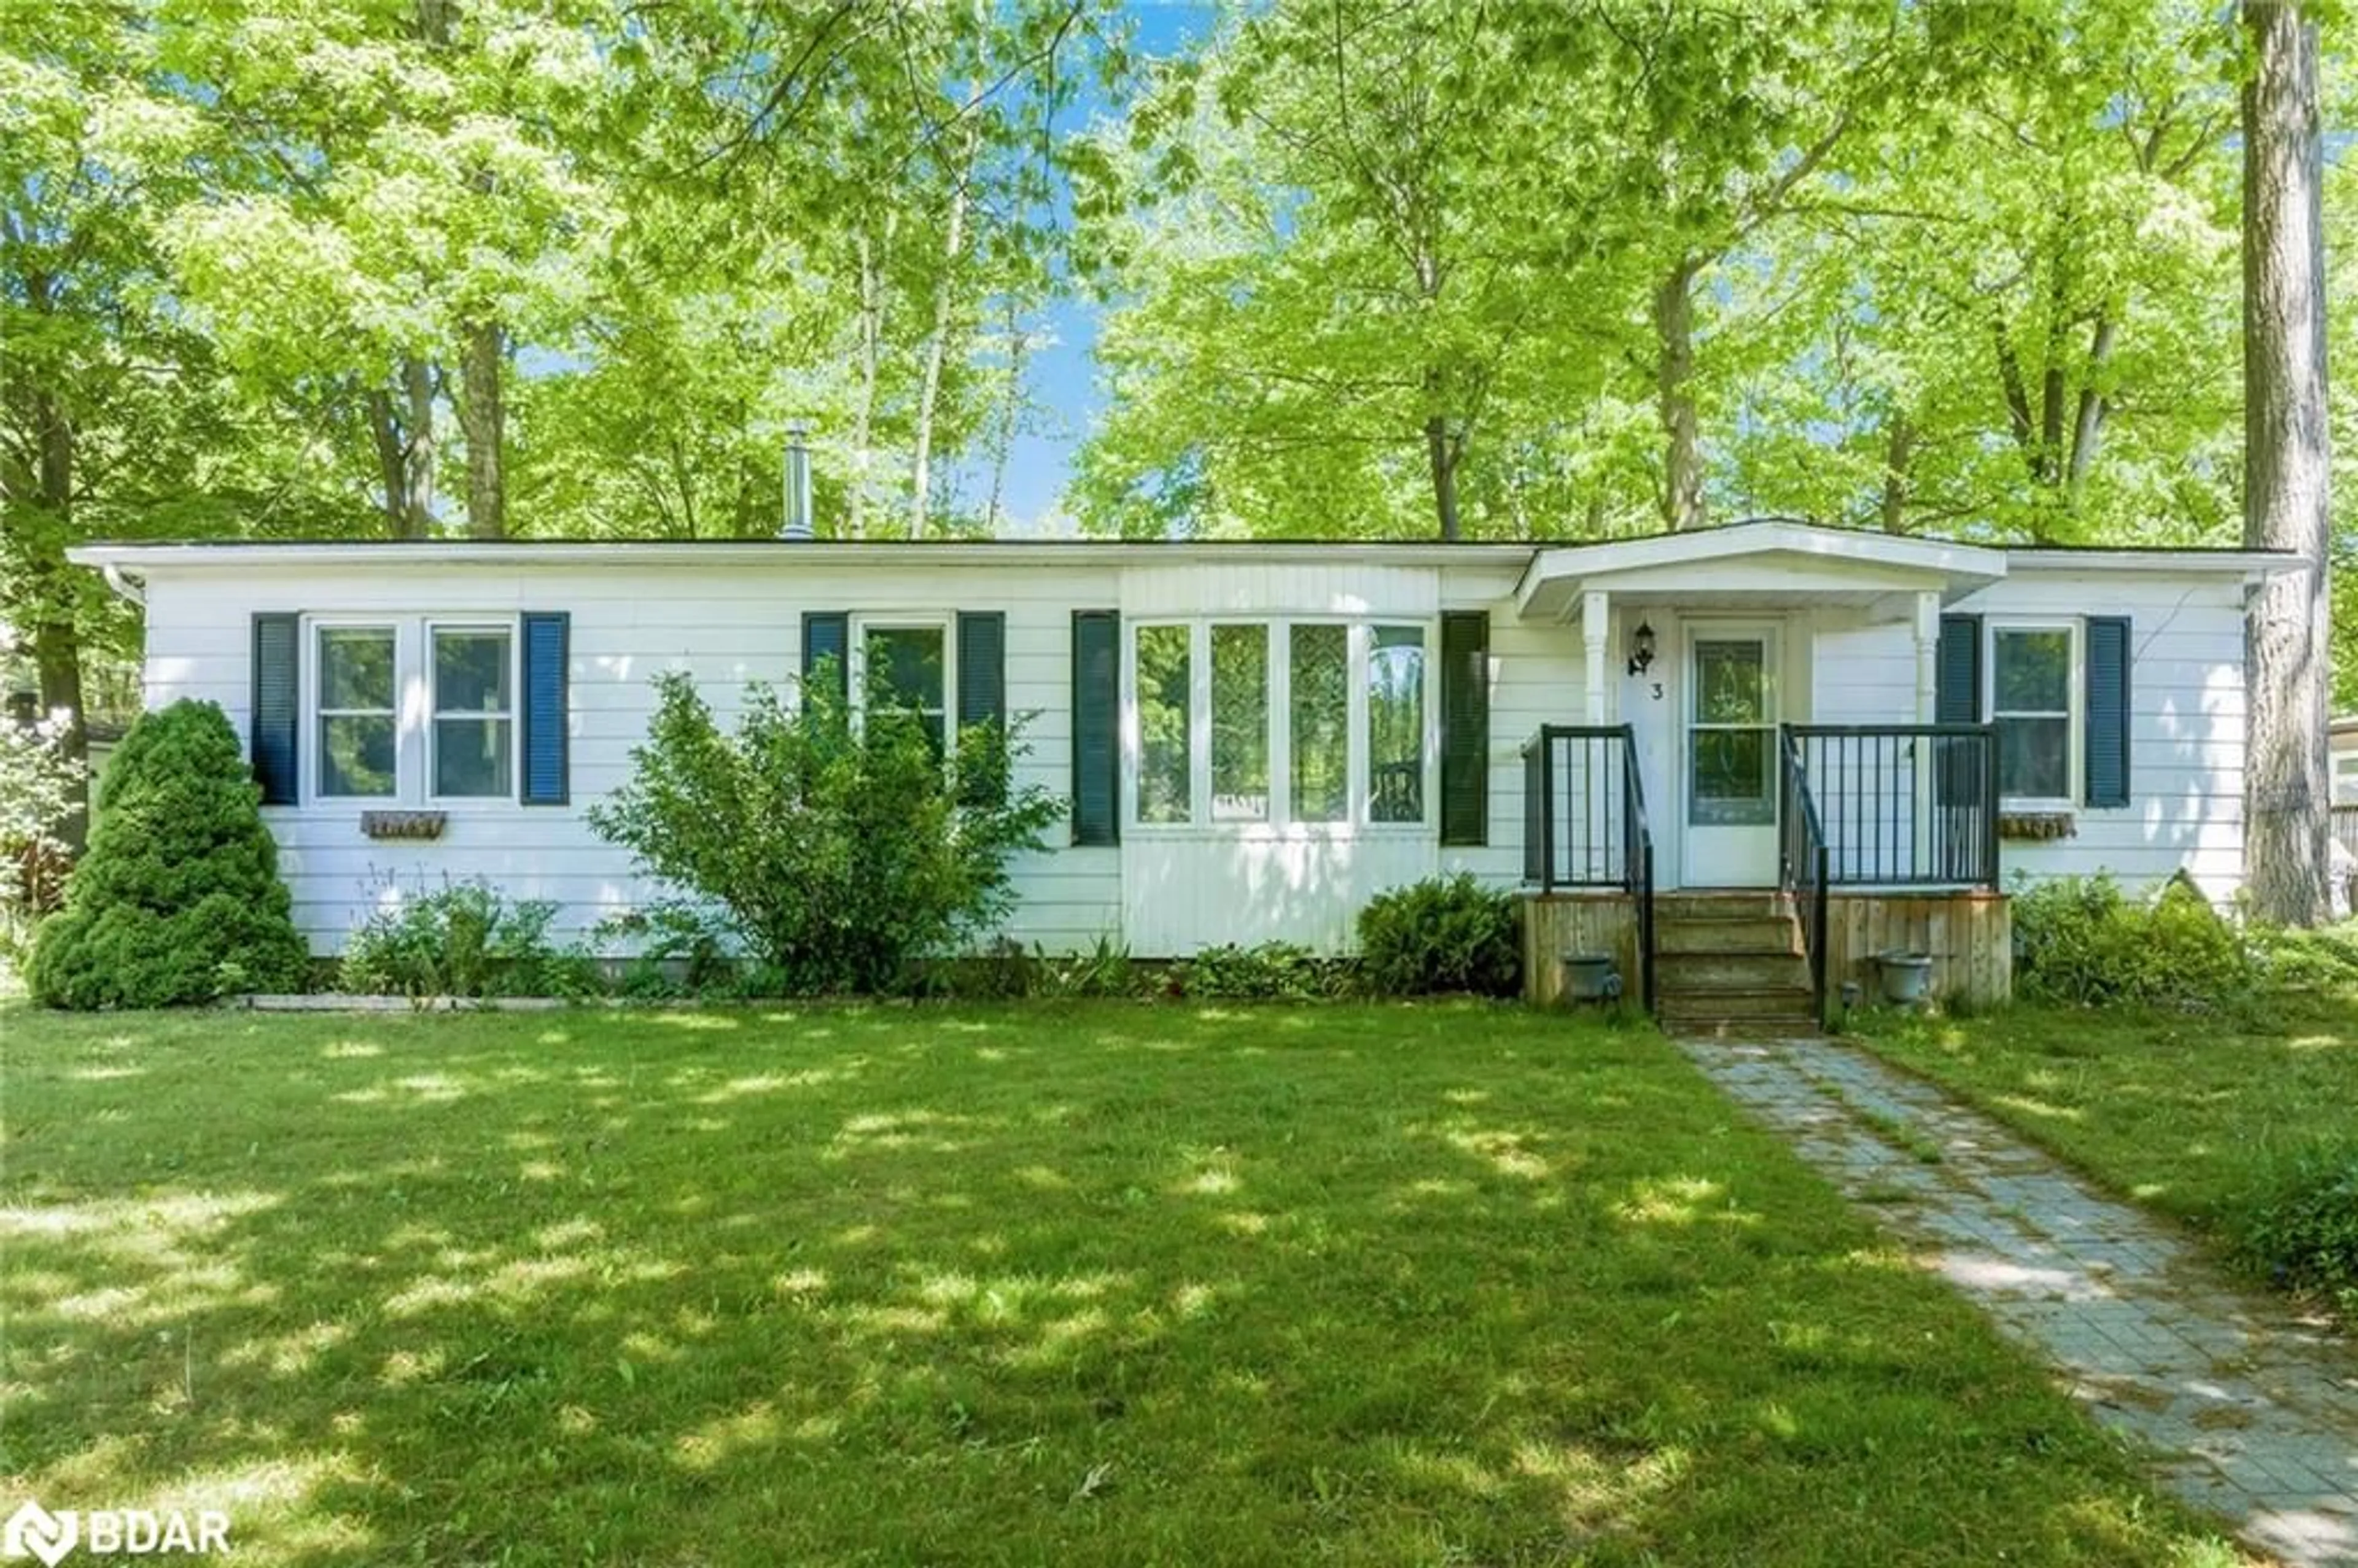 Cottage for 3 Murray Dr, Wasaga Beach Ontario L9Z 1K3